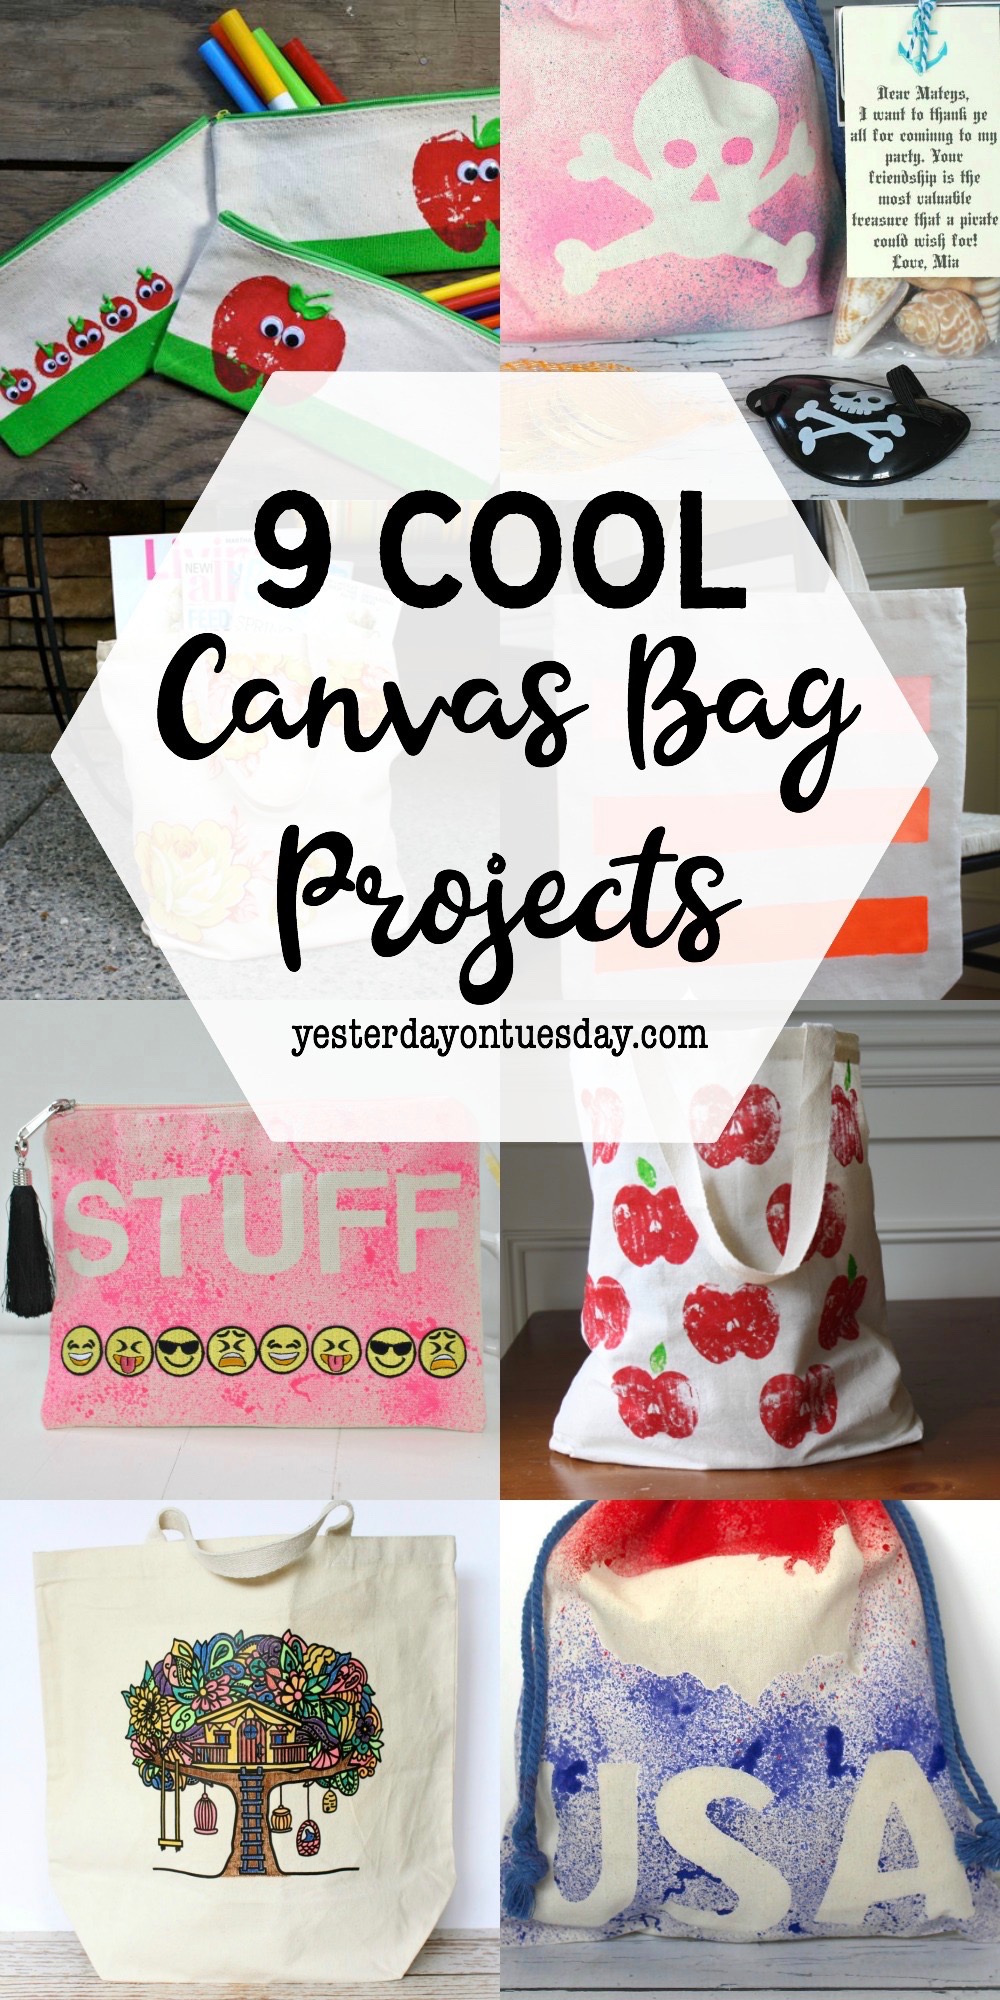 9 Cool Canvas Bag Projects | Yesterday On Tuesday